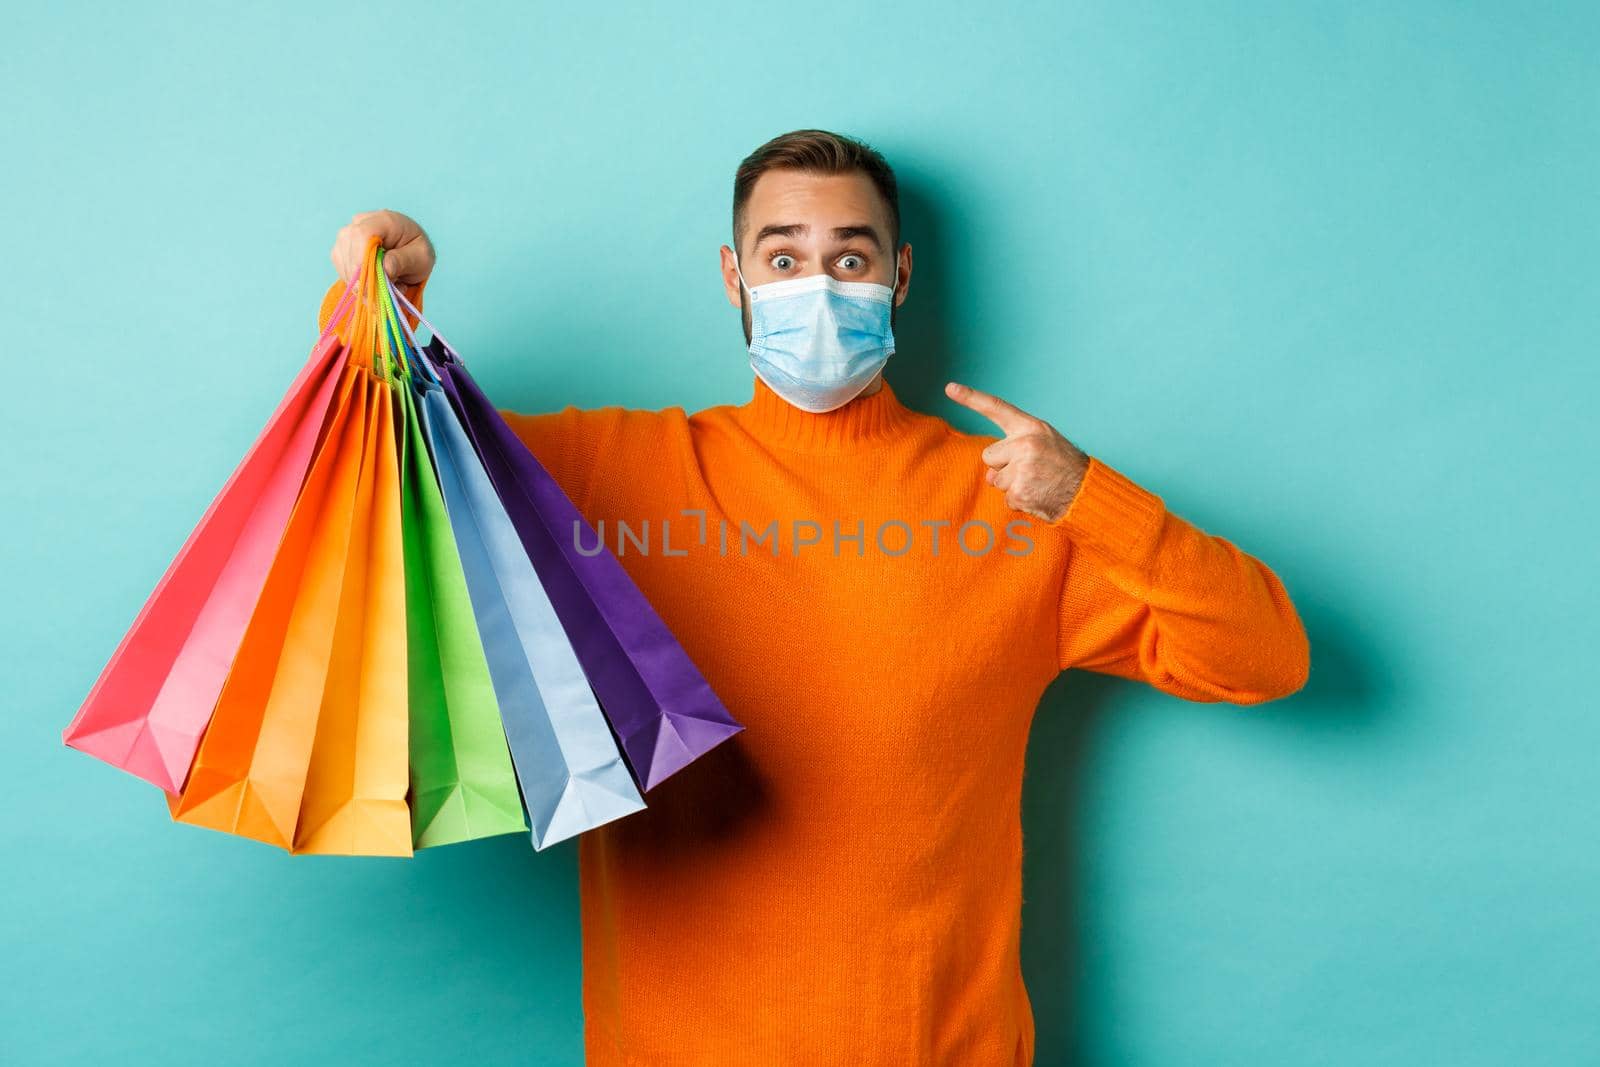 Covid-19, social distancing and lifestyle concept. Young man in face mask showing shopping bags, buying holiday gifts during pandemic, standing over blue background.